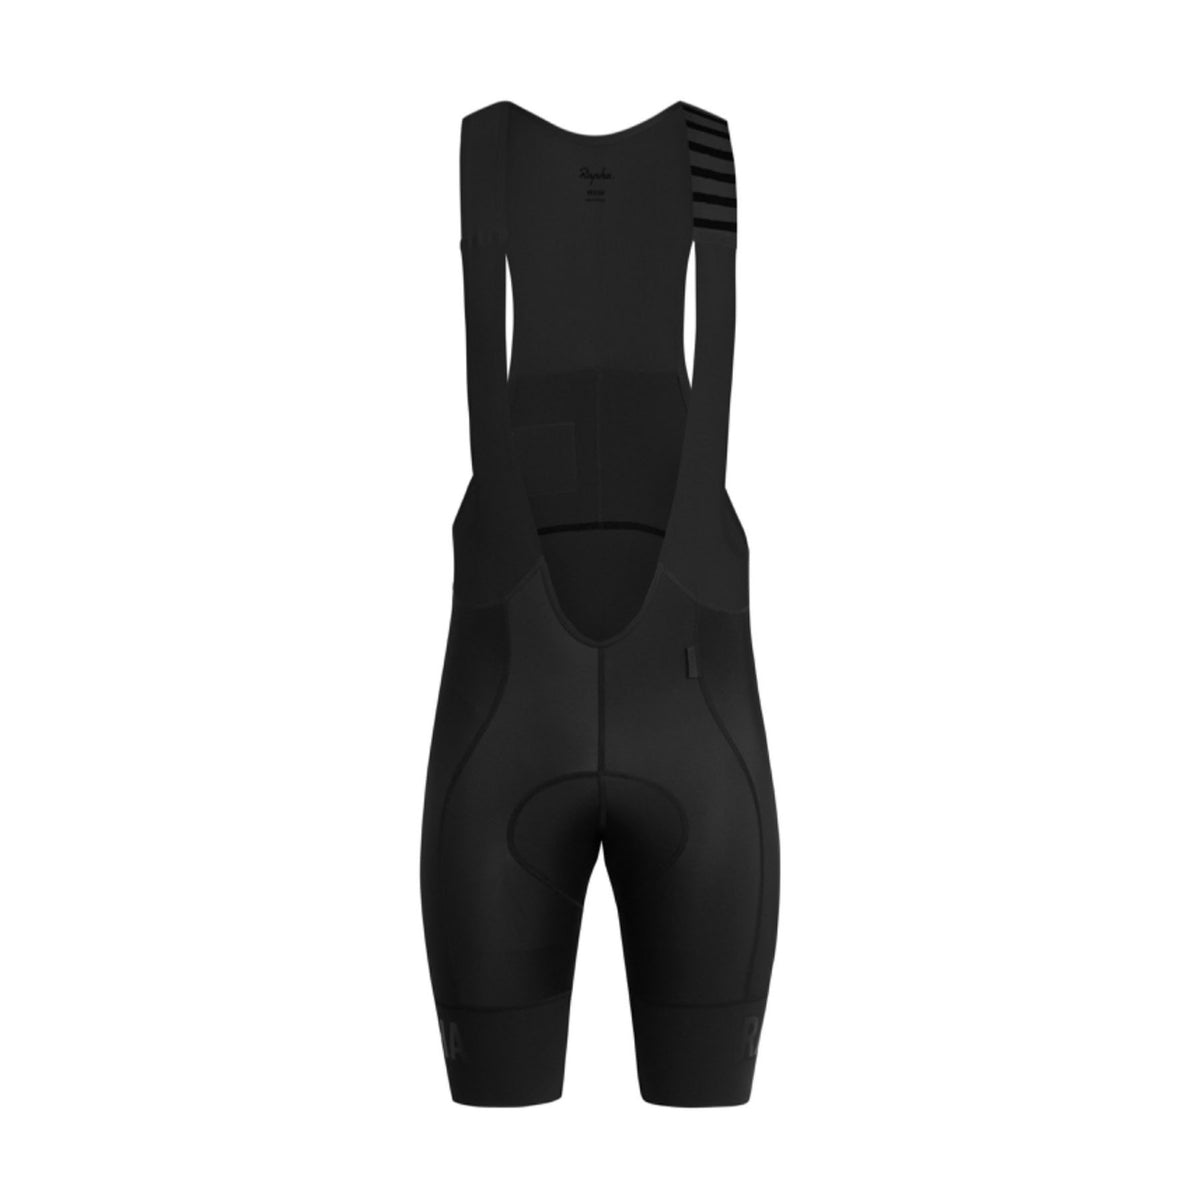 Hero image featuring the front of the Rapha Men's Pro Team Bib Shorts in all black.